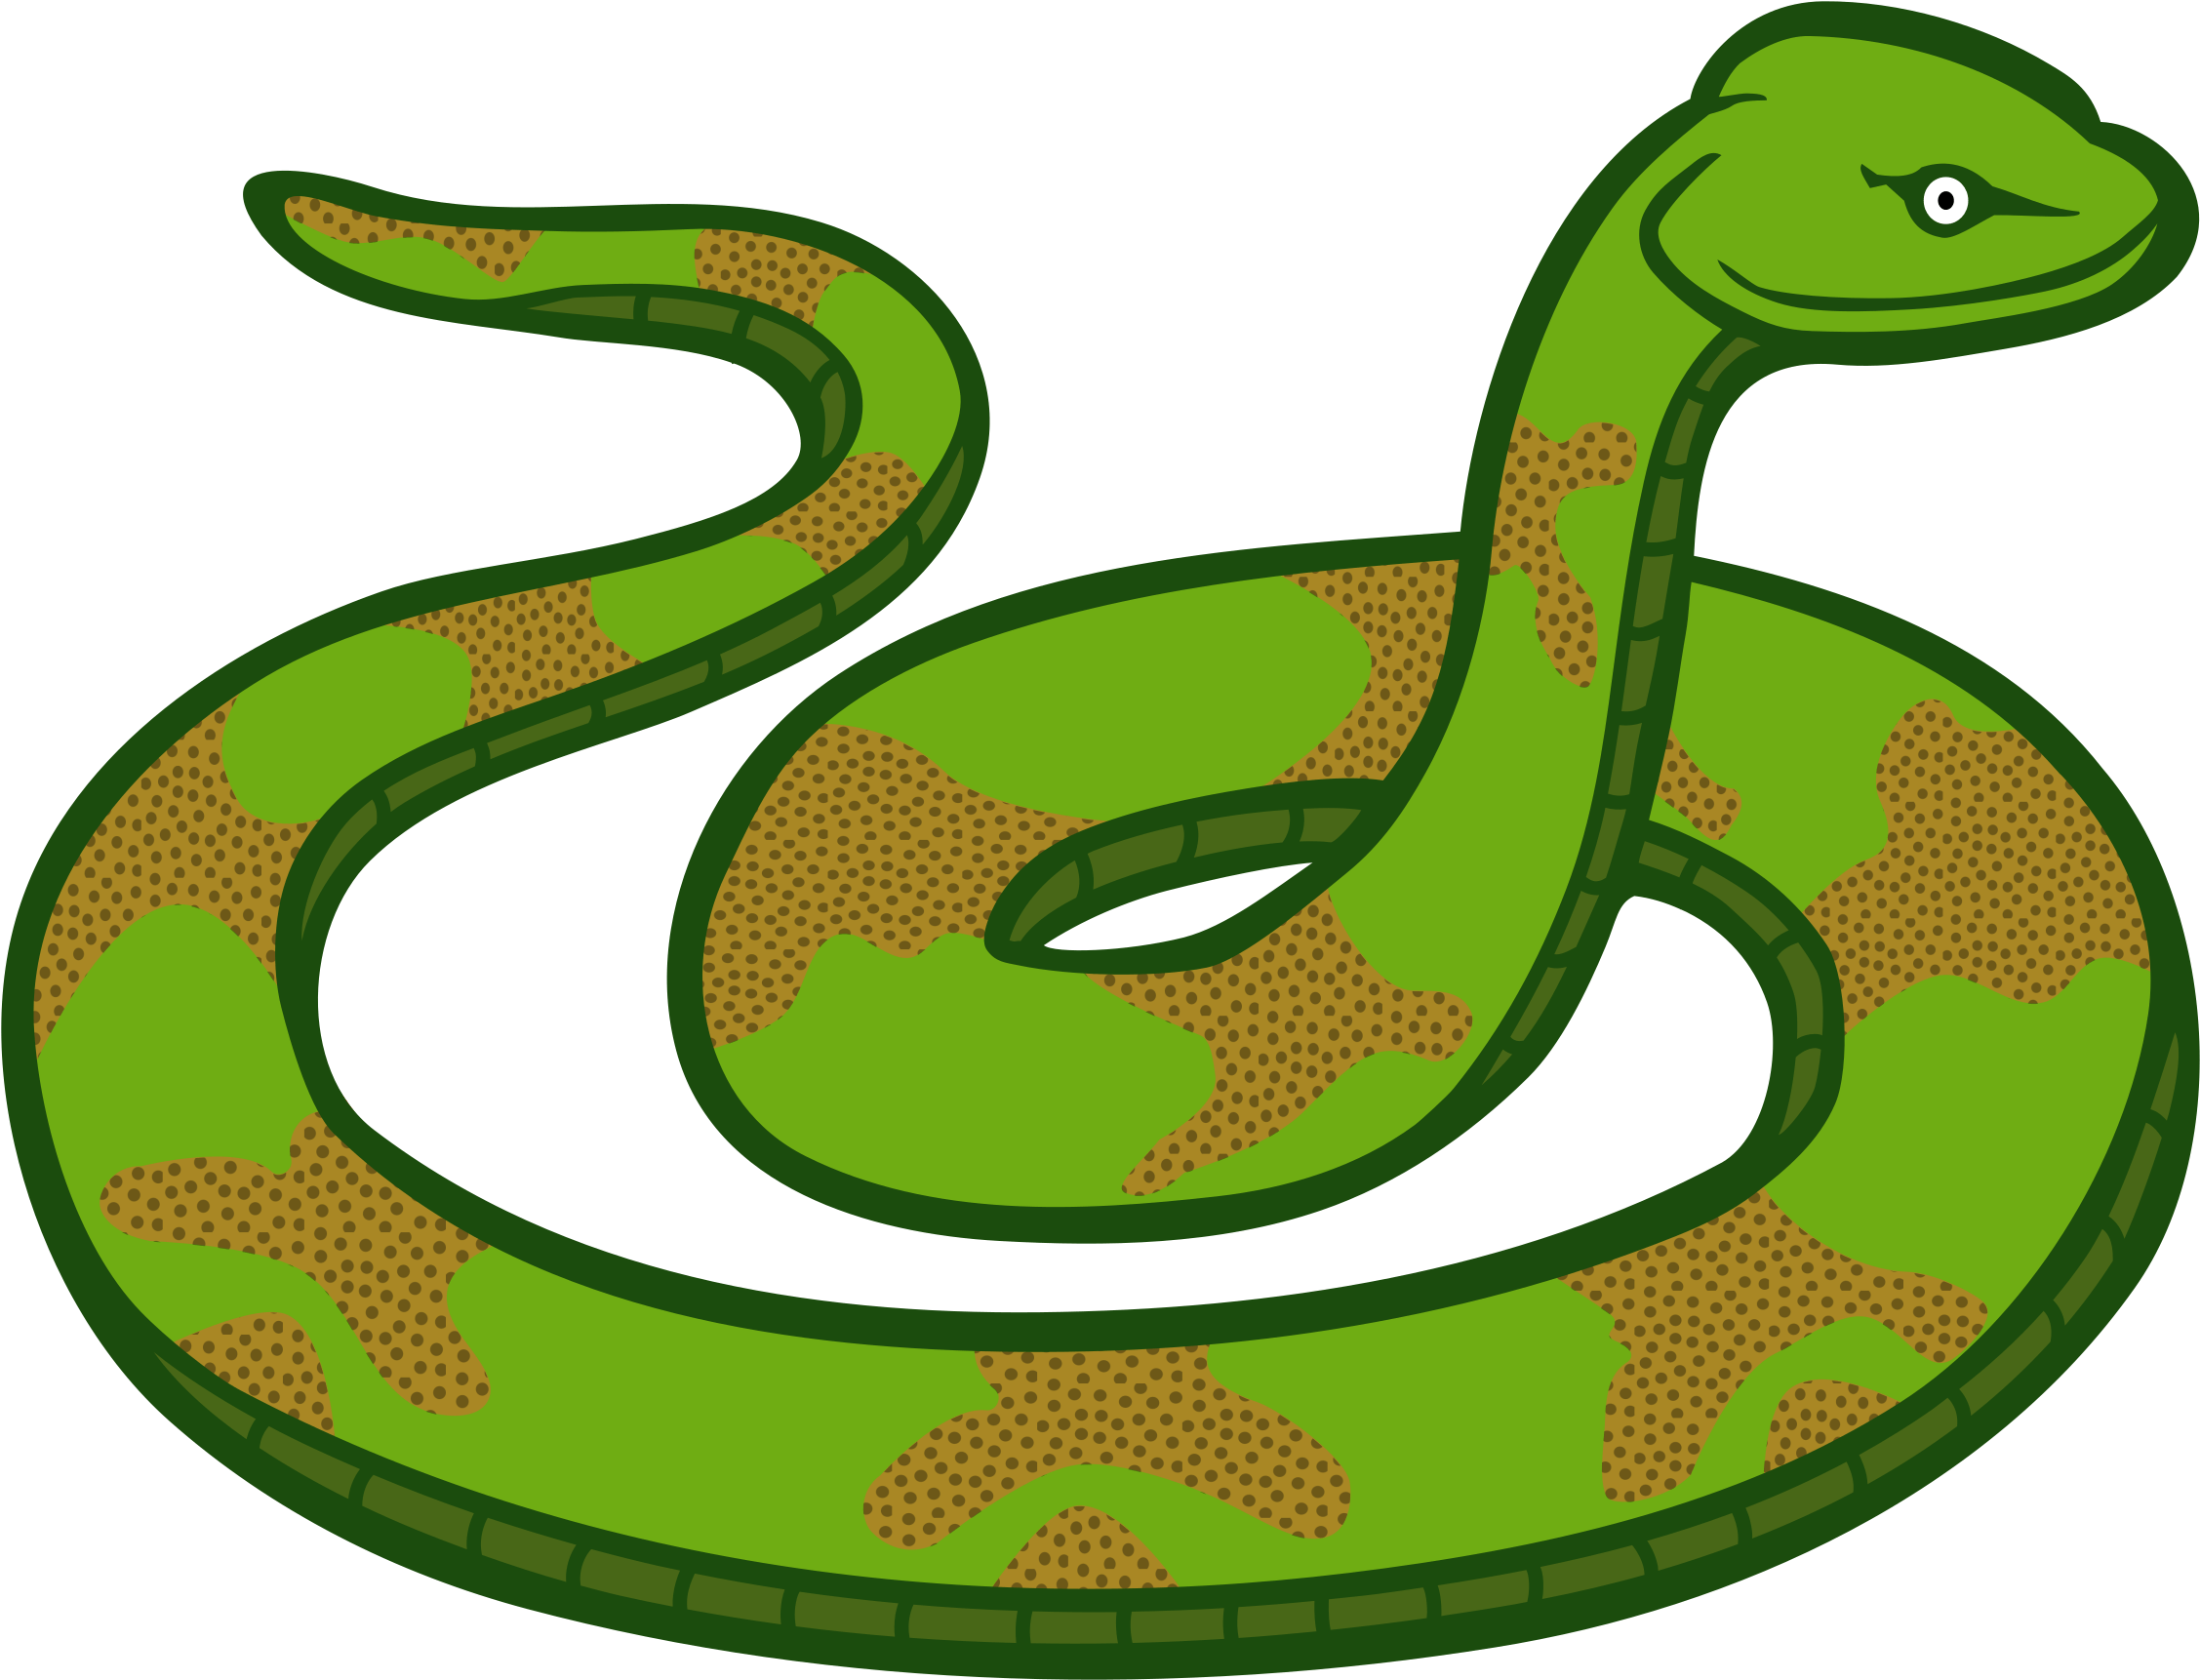 Scary Snake Clipart At Getdrawings Snake Clipart